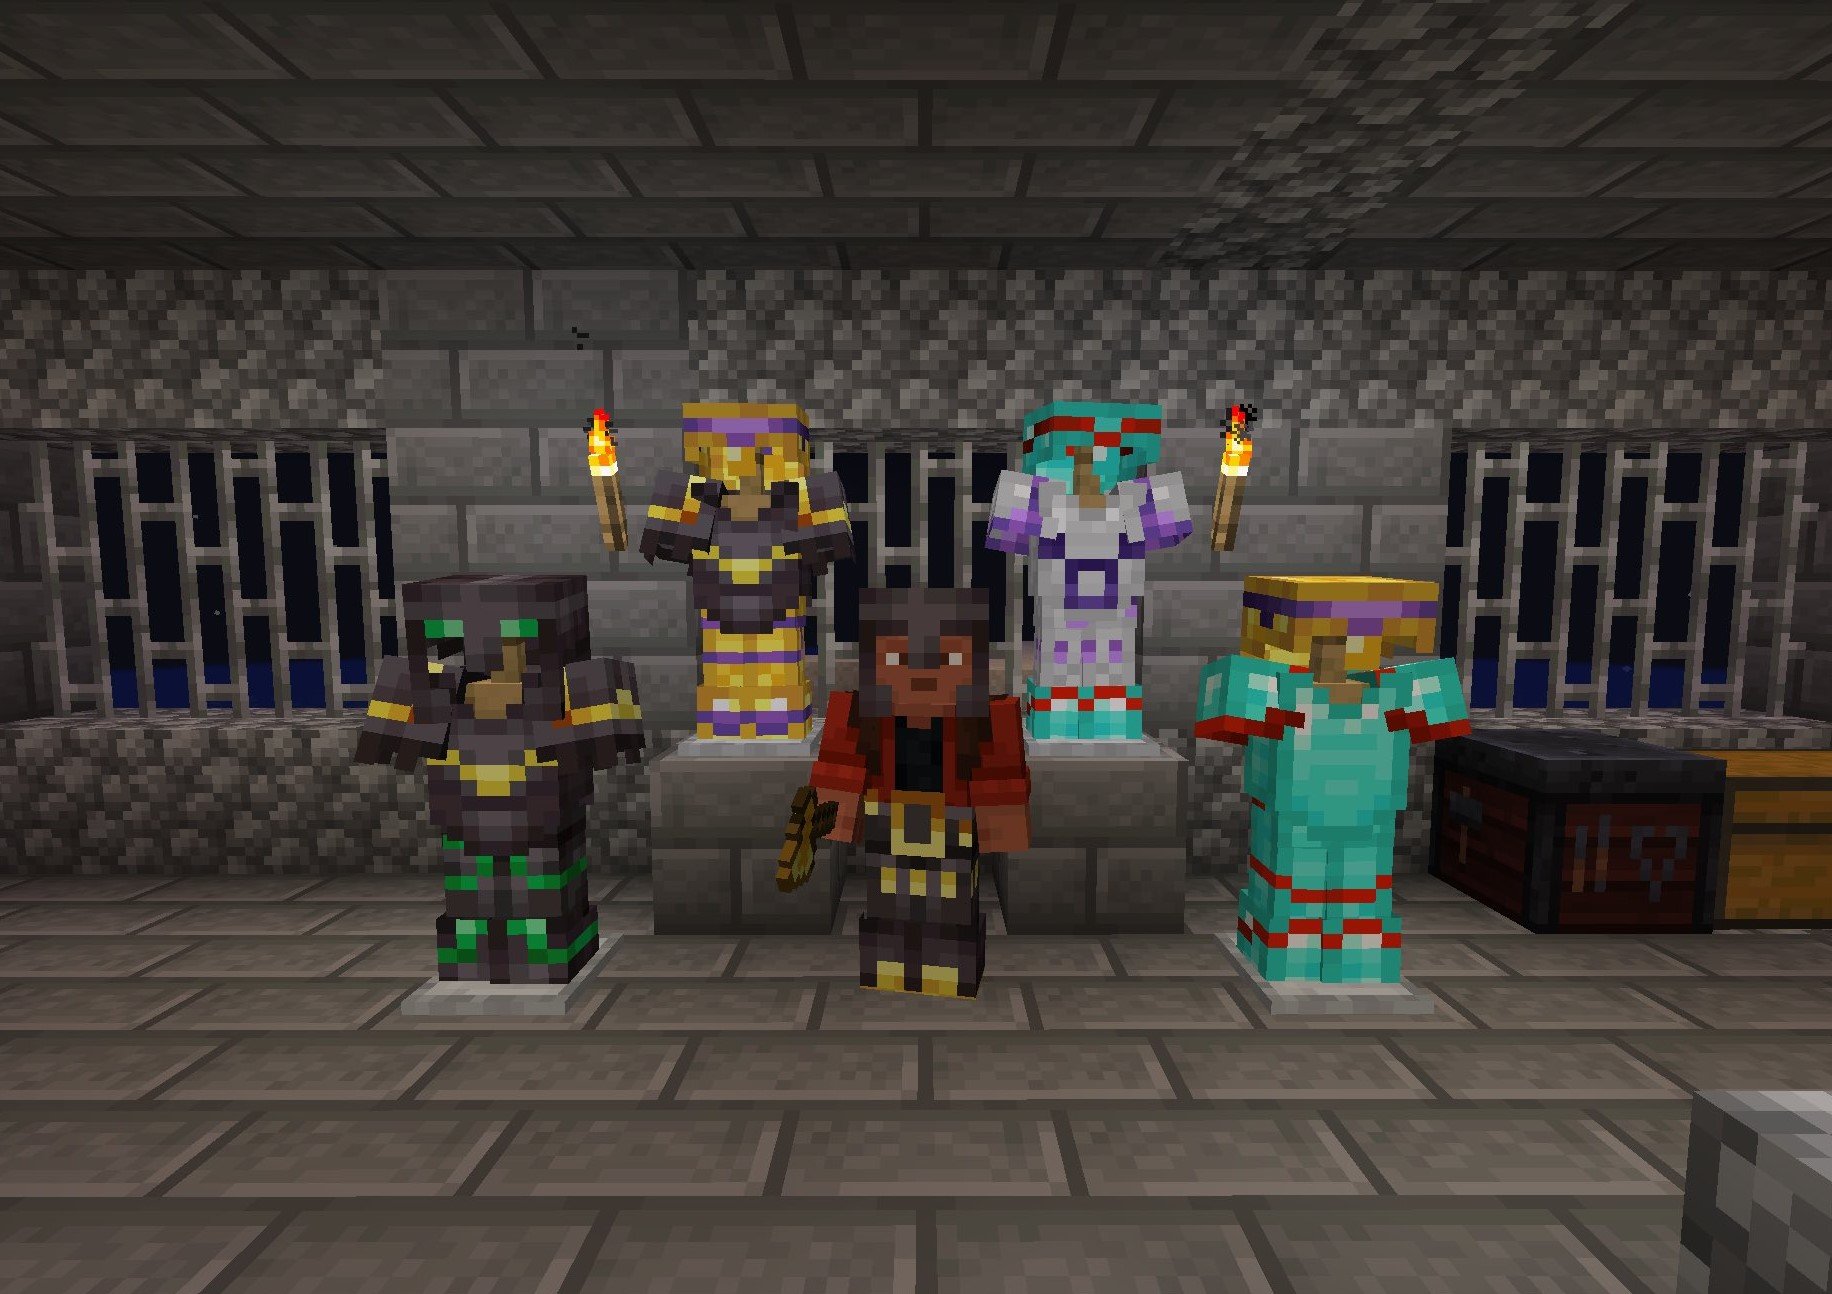 minecraft-s-upcoming-armor-trim-update-in-1-20-has-players-divided